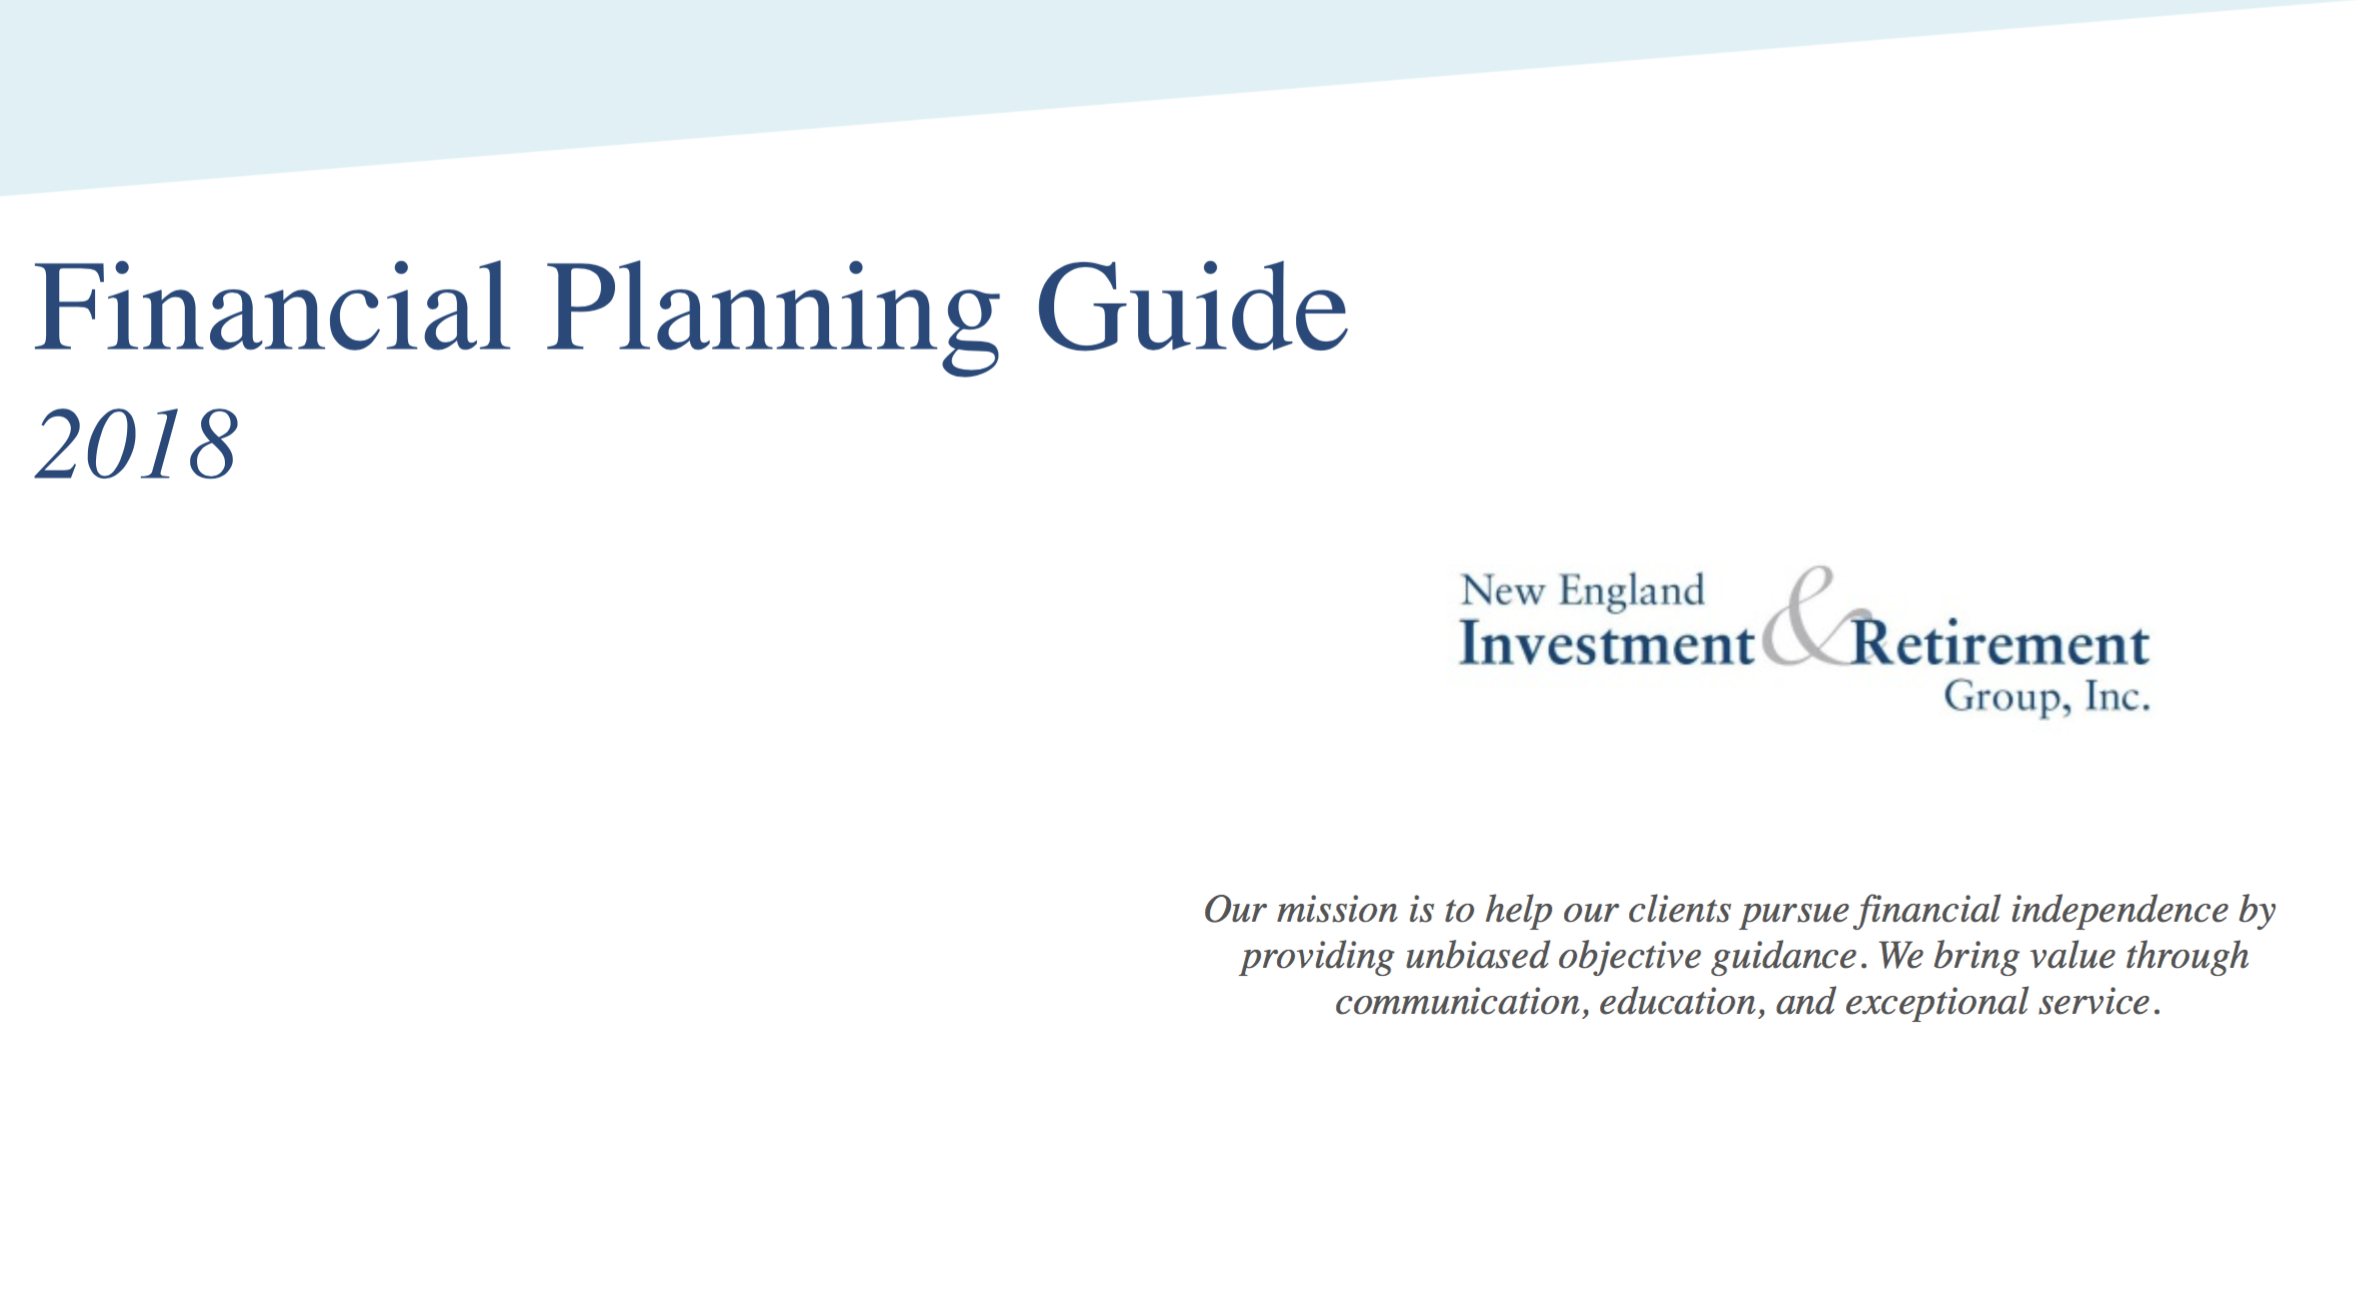 Financial Planning Guide NEIRG